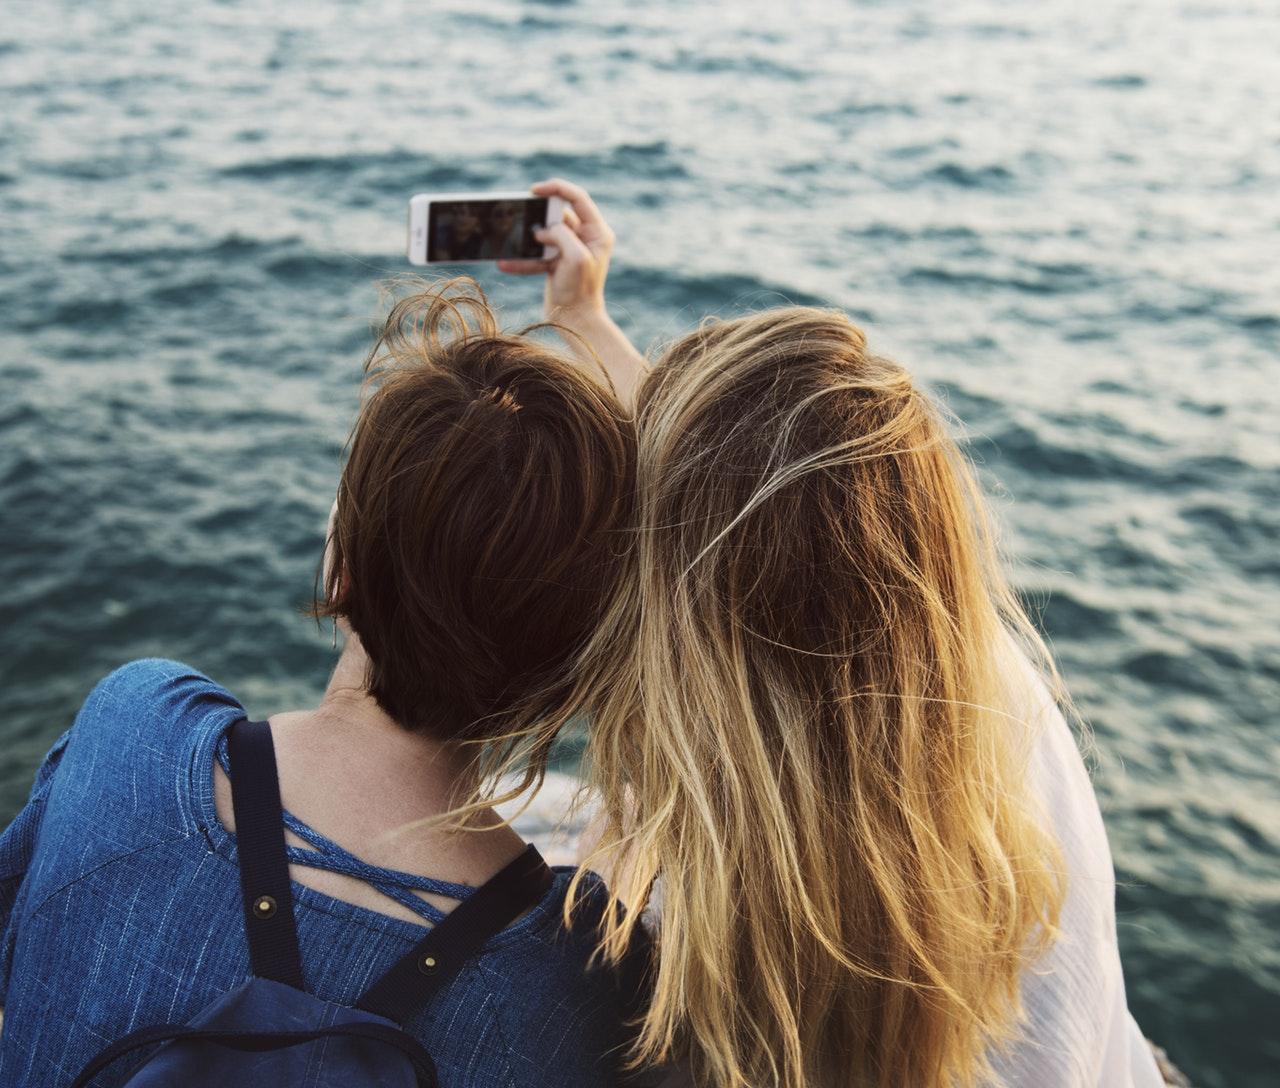 Photography ideas for International Day of Friendship